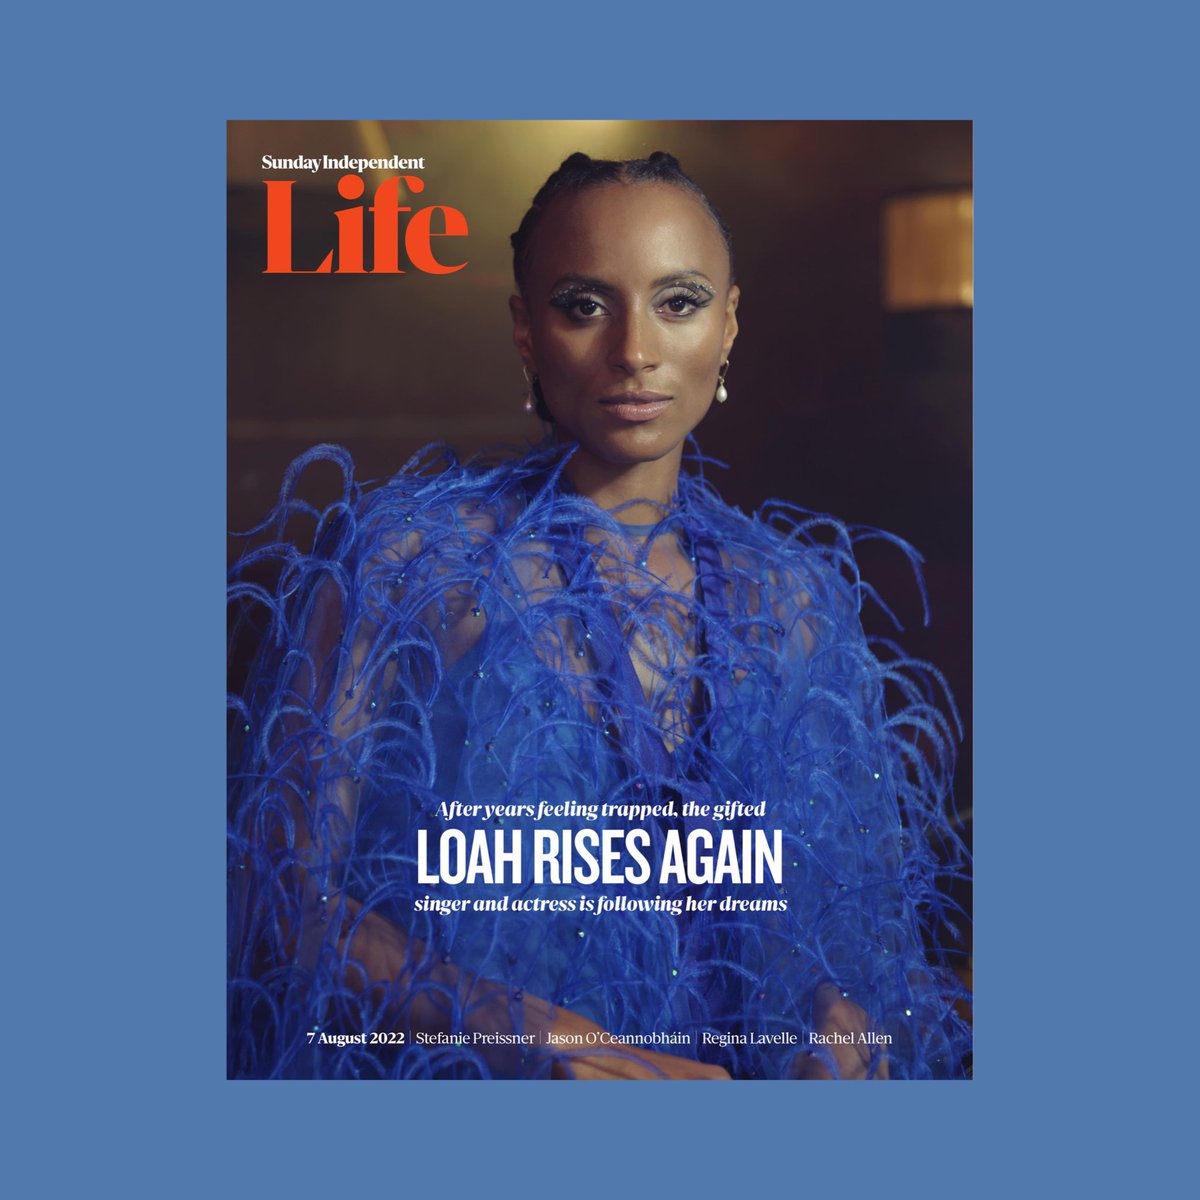 Lady in blue 💙 @musicbyloah on the cover of today’s Life magazine. Read the interview below 👇